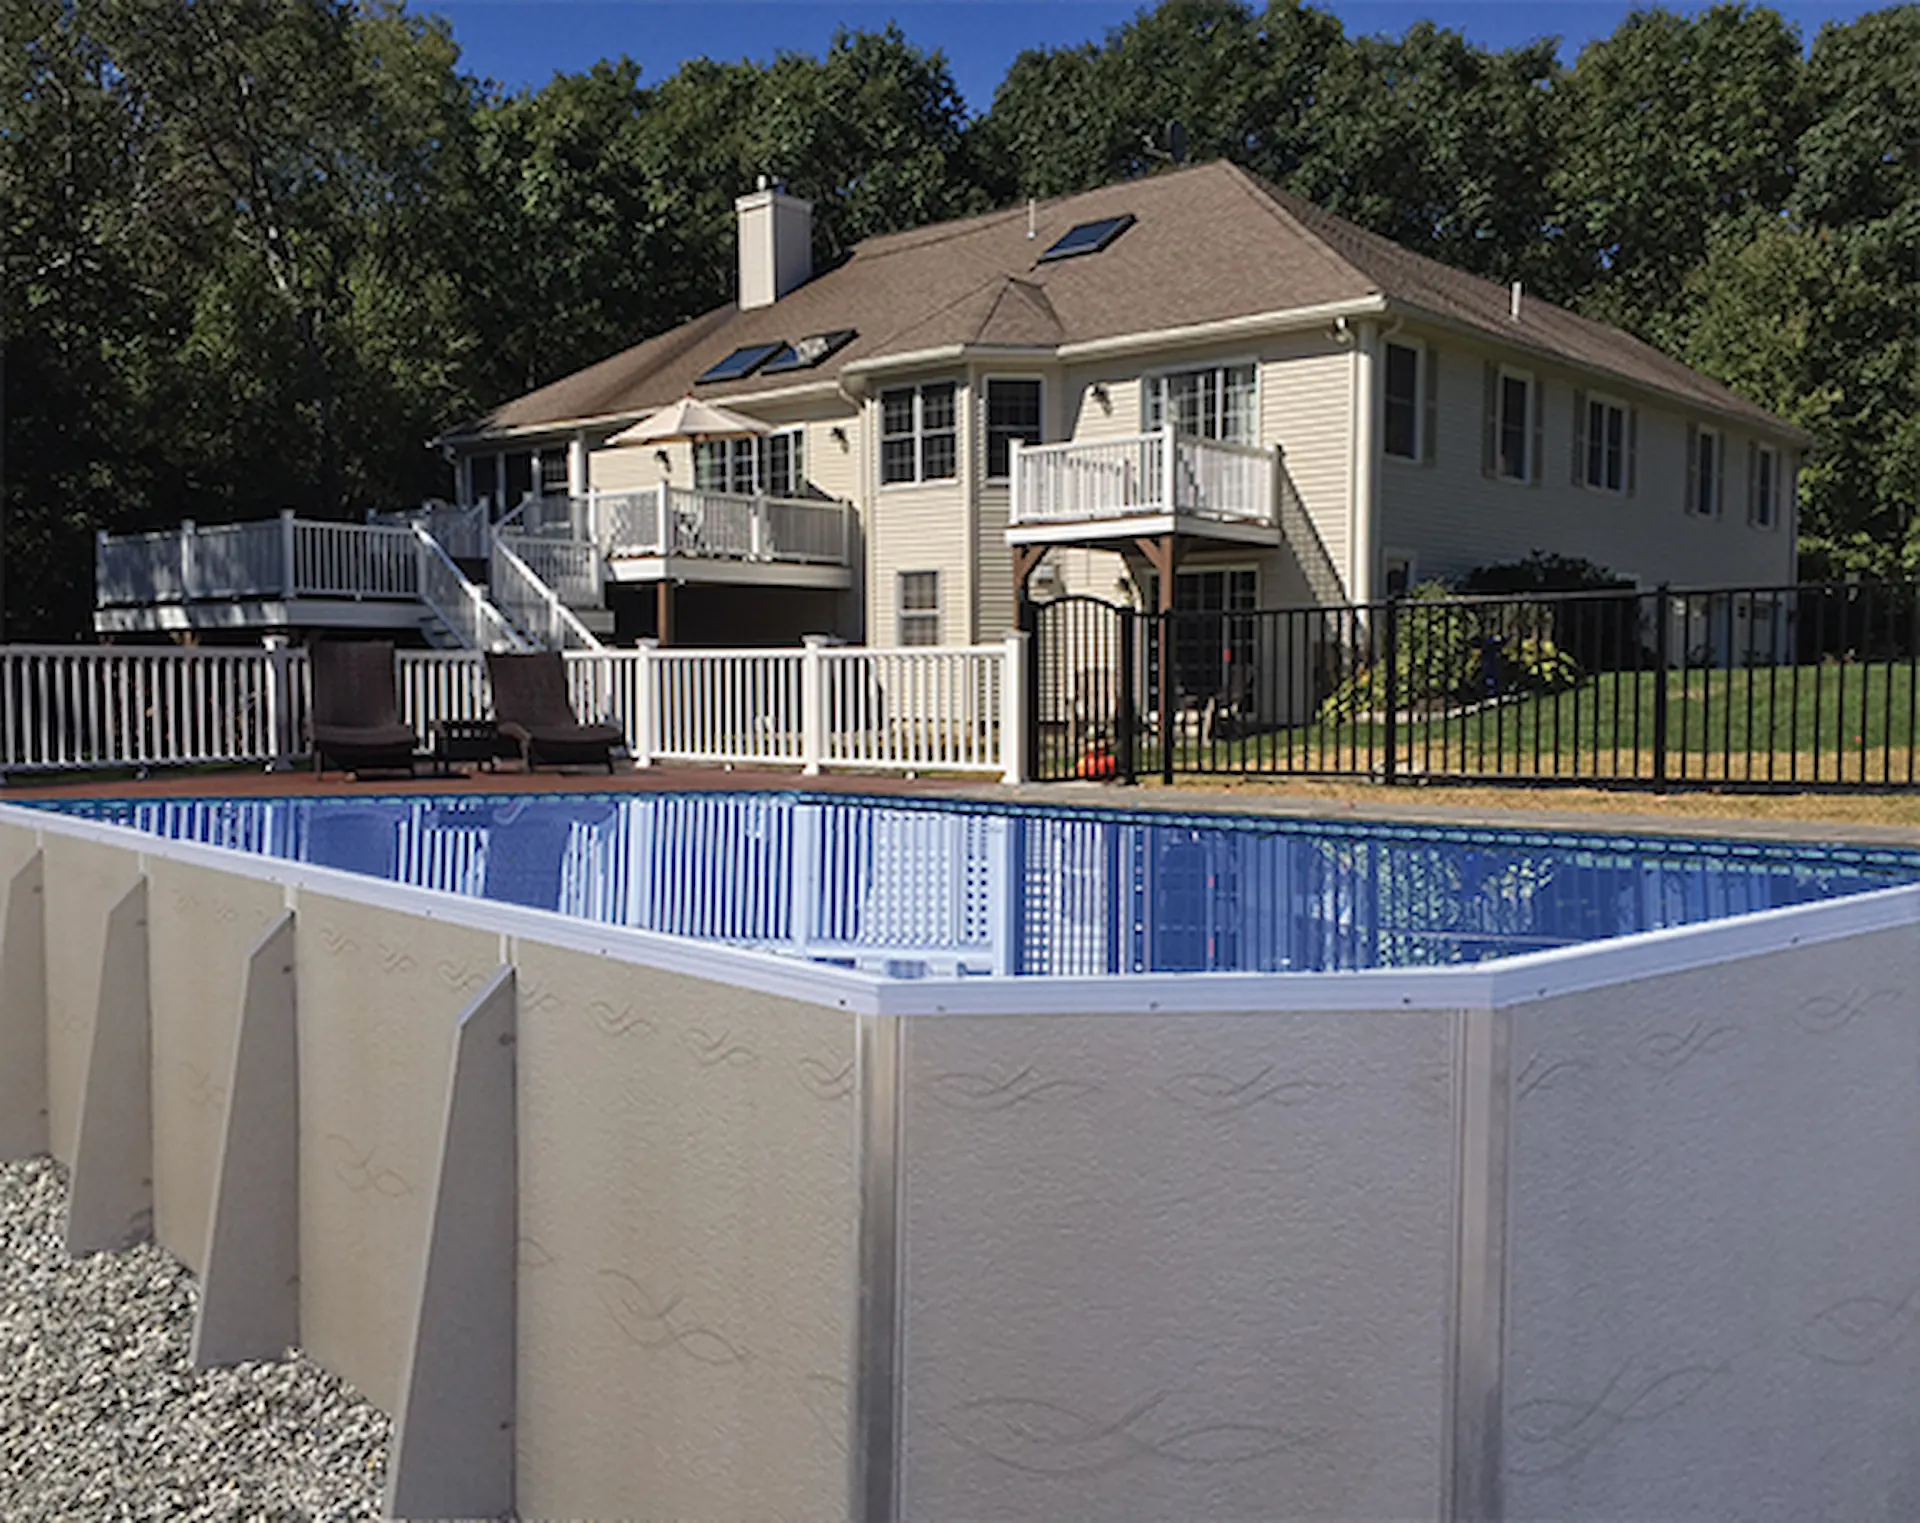 A rectangular above ground swimming pool sits in a fenced backyard of a Pennsylvania home.